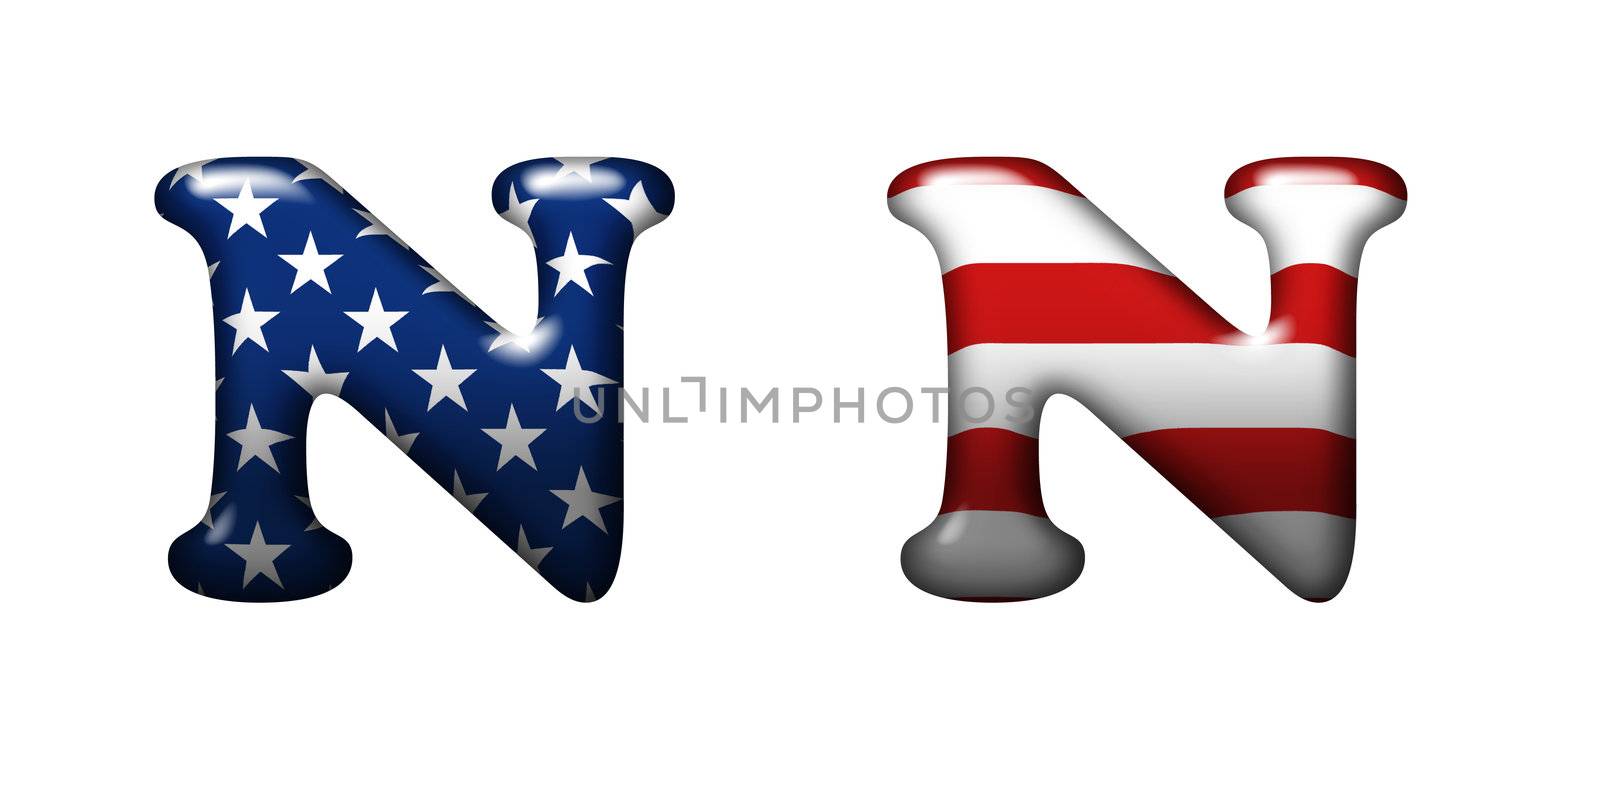 Exclusive collection letters with american stars and stripes by mozzyb